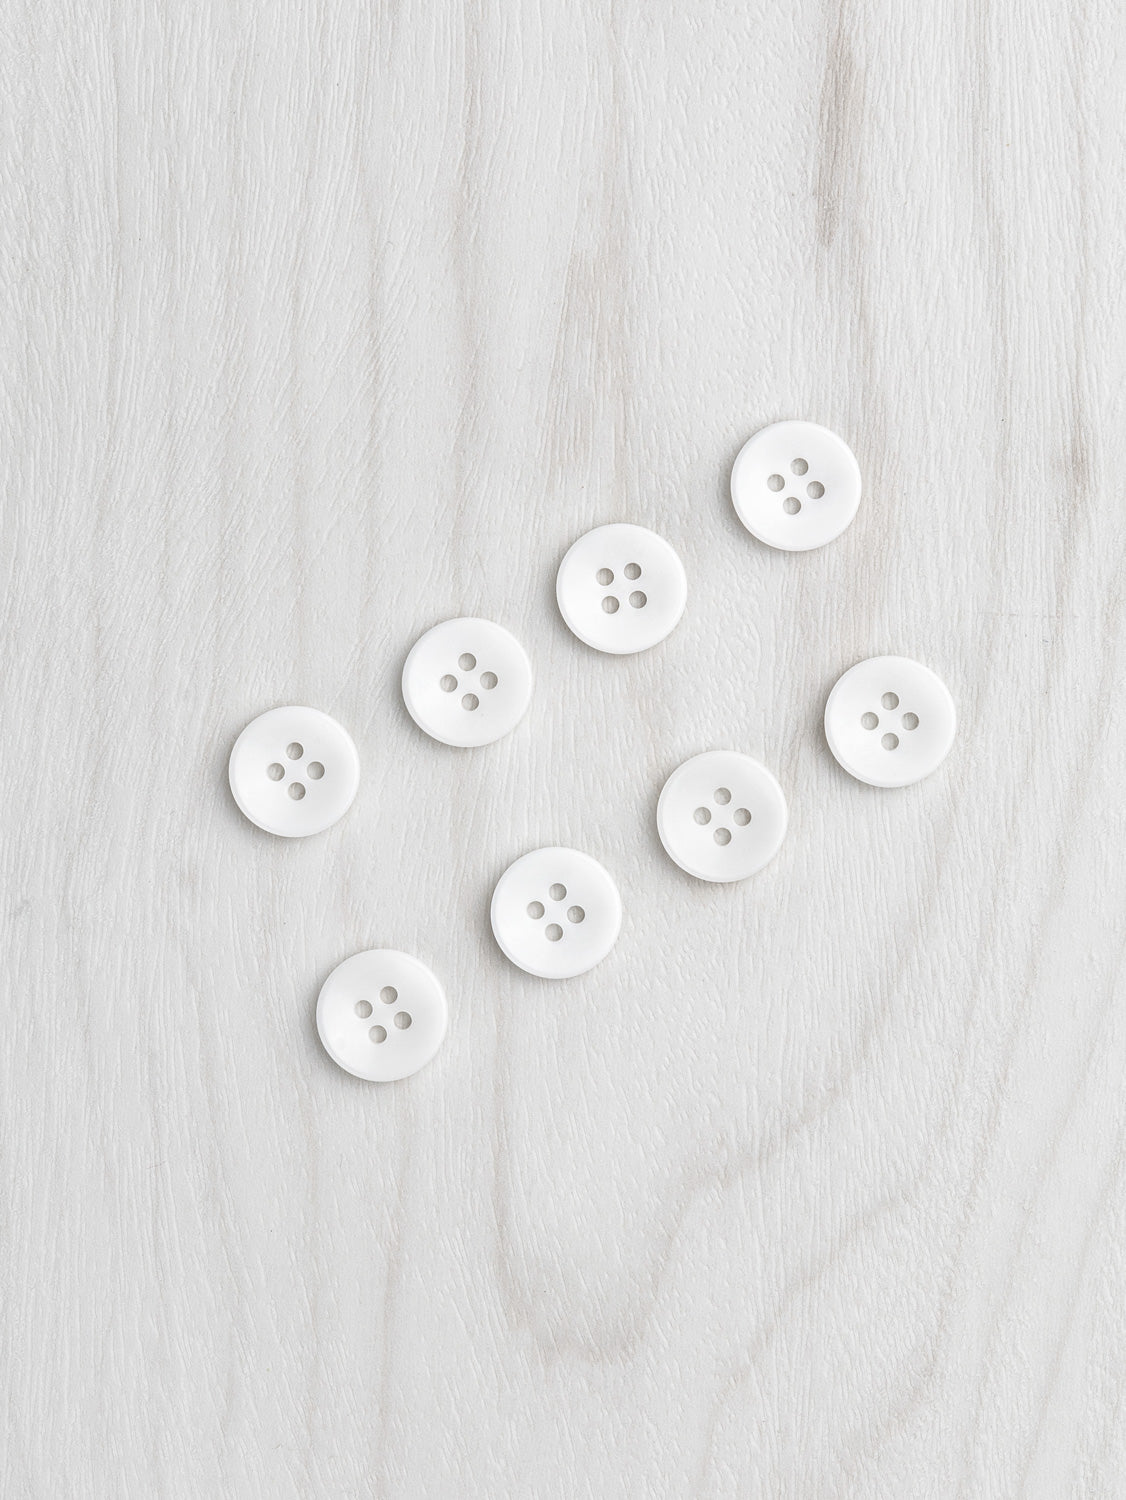 N-BUT021-001-Corozo-nut-button-4-hole-12mm-1_2-inch-8-pack-White-Core-Fabrics_c5079165-2844-4d5c-b6af-00ee79736a3b.jpg